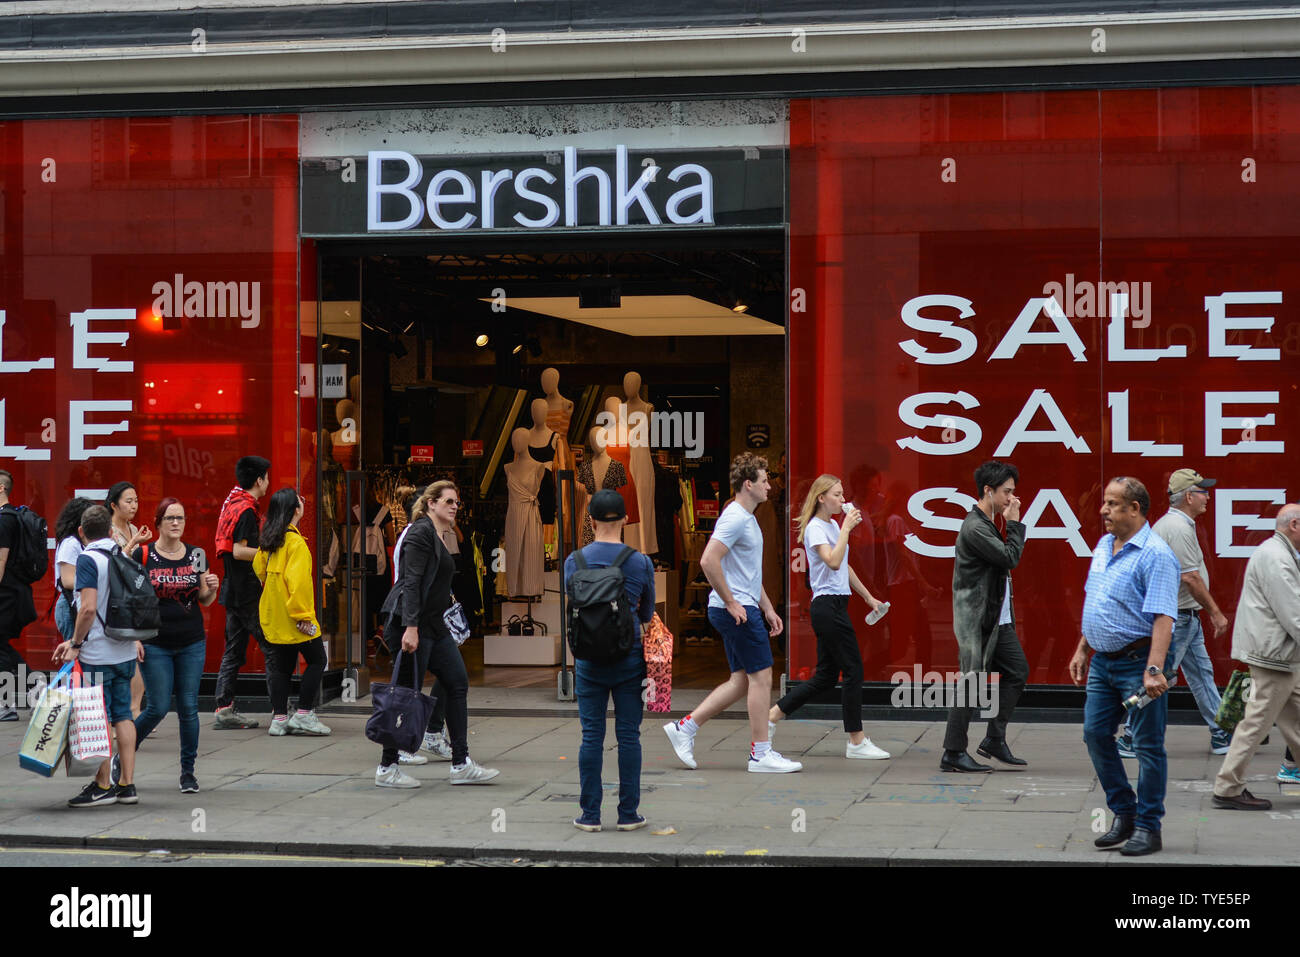 Bershka Shop High Resolution Stock Photography and Images - Alamy